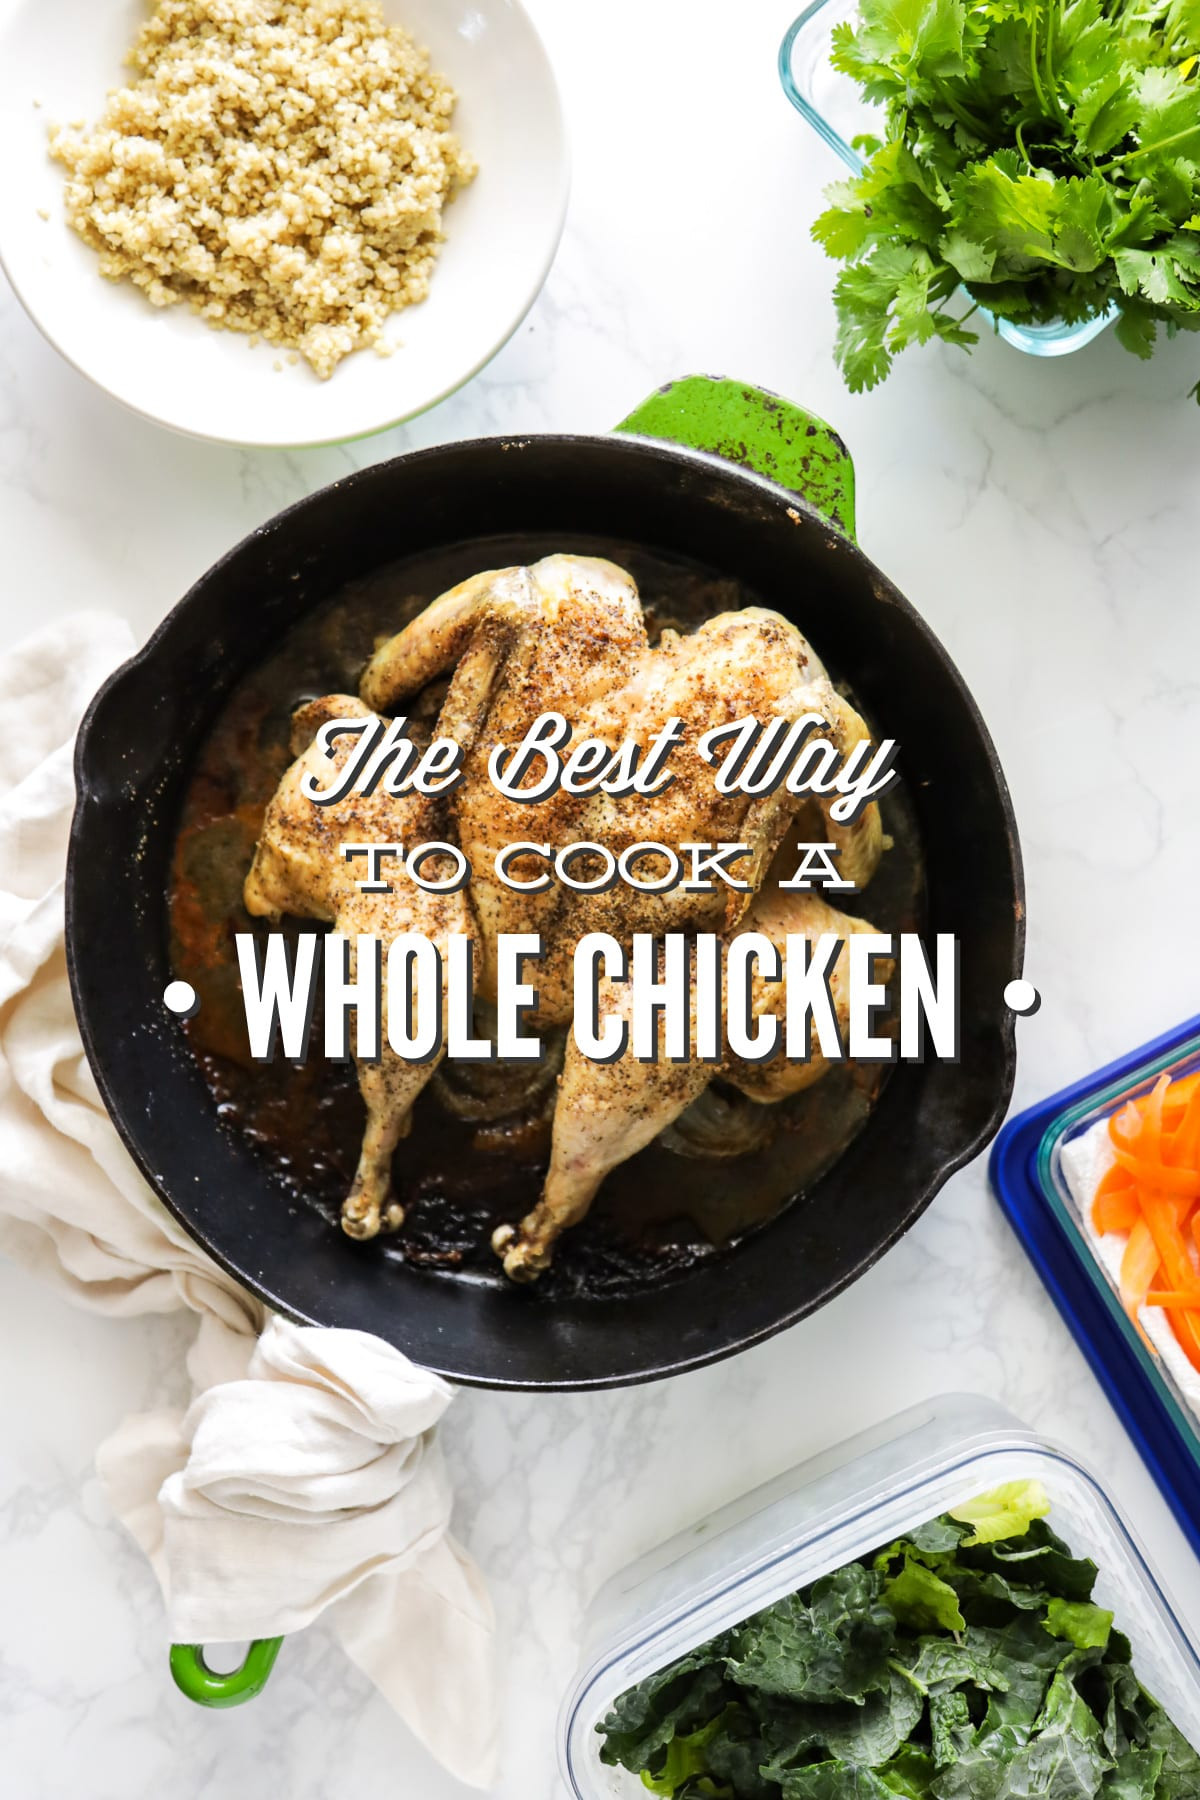 Cook Whole Chicken
 The Best and Quickest Way to Cook Roast a Whole Chicken